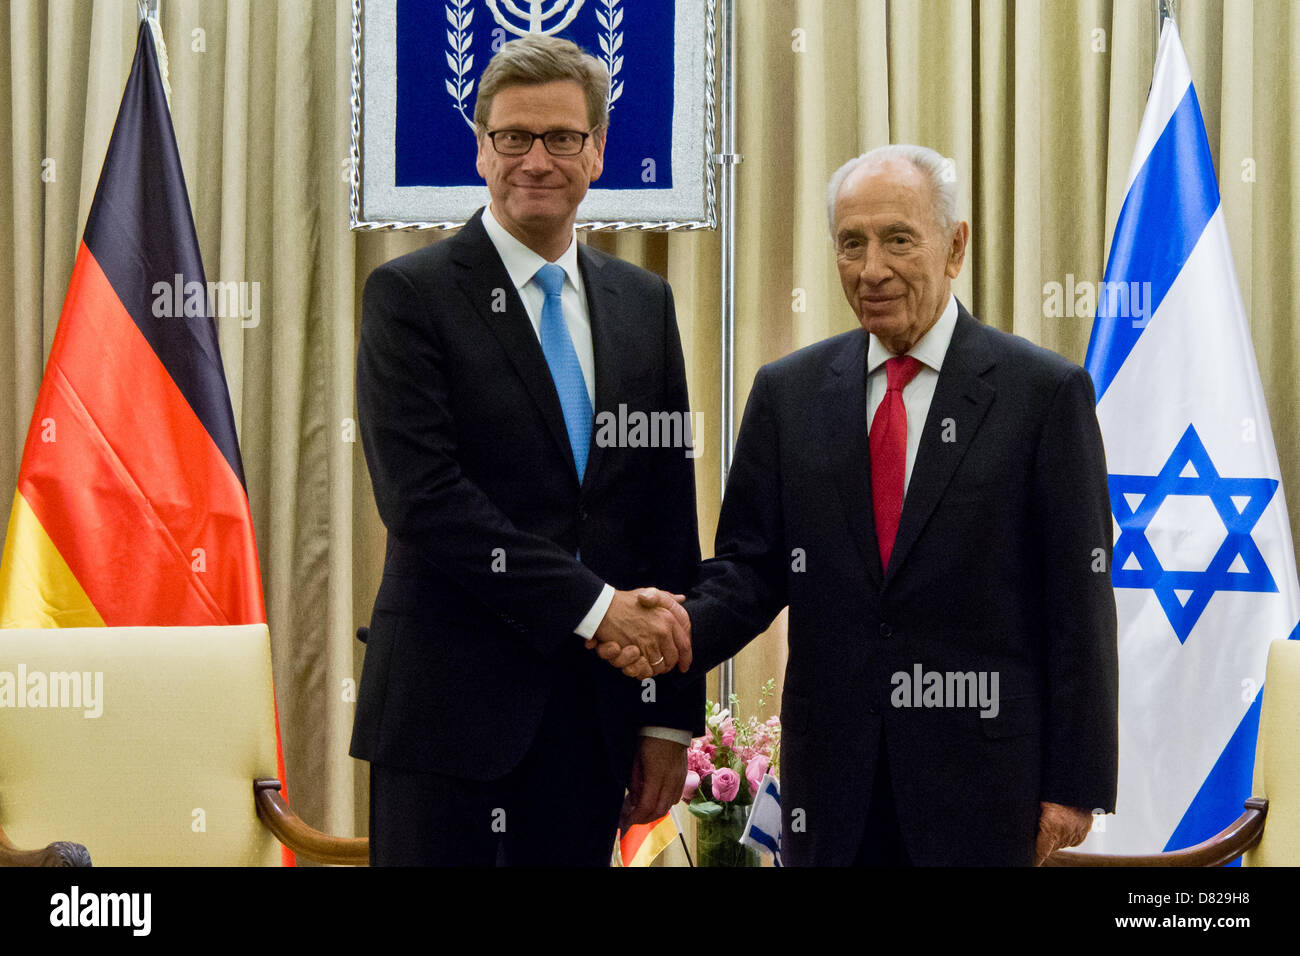 Jerusalem, Israel. 17th May 2013. Israeli President Shimon Peres (R) shakes hands with Minister of Foreign Affairs of the Federal Republic of Germany, Guido Westerwelle (L), at the onset of a diplomatic work meeting at the Presidents' Residence. Jerusalem, Israel. 17-May-2013.  Israeli President Shimon Peres hosts Minister of Foreign Affairs of the Federal Republic of Germany, Guido Westerwelle, for a diplomatic work meeting at the Presidents' Residence. Credit:  Nir Alon / Alamy Live News Stock Photo